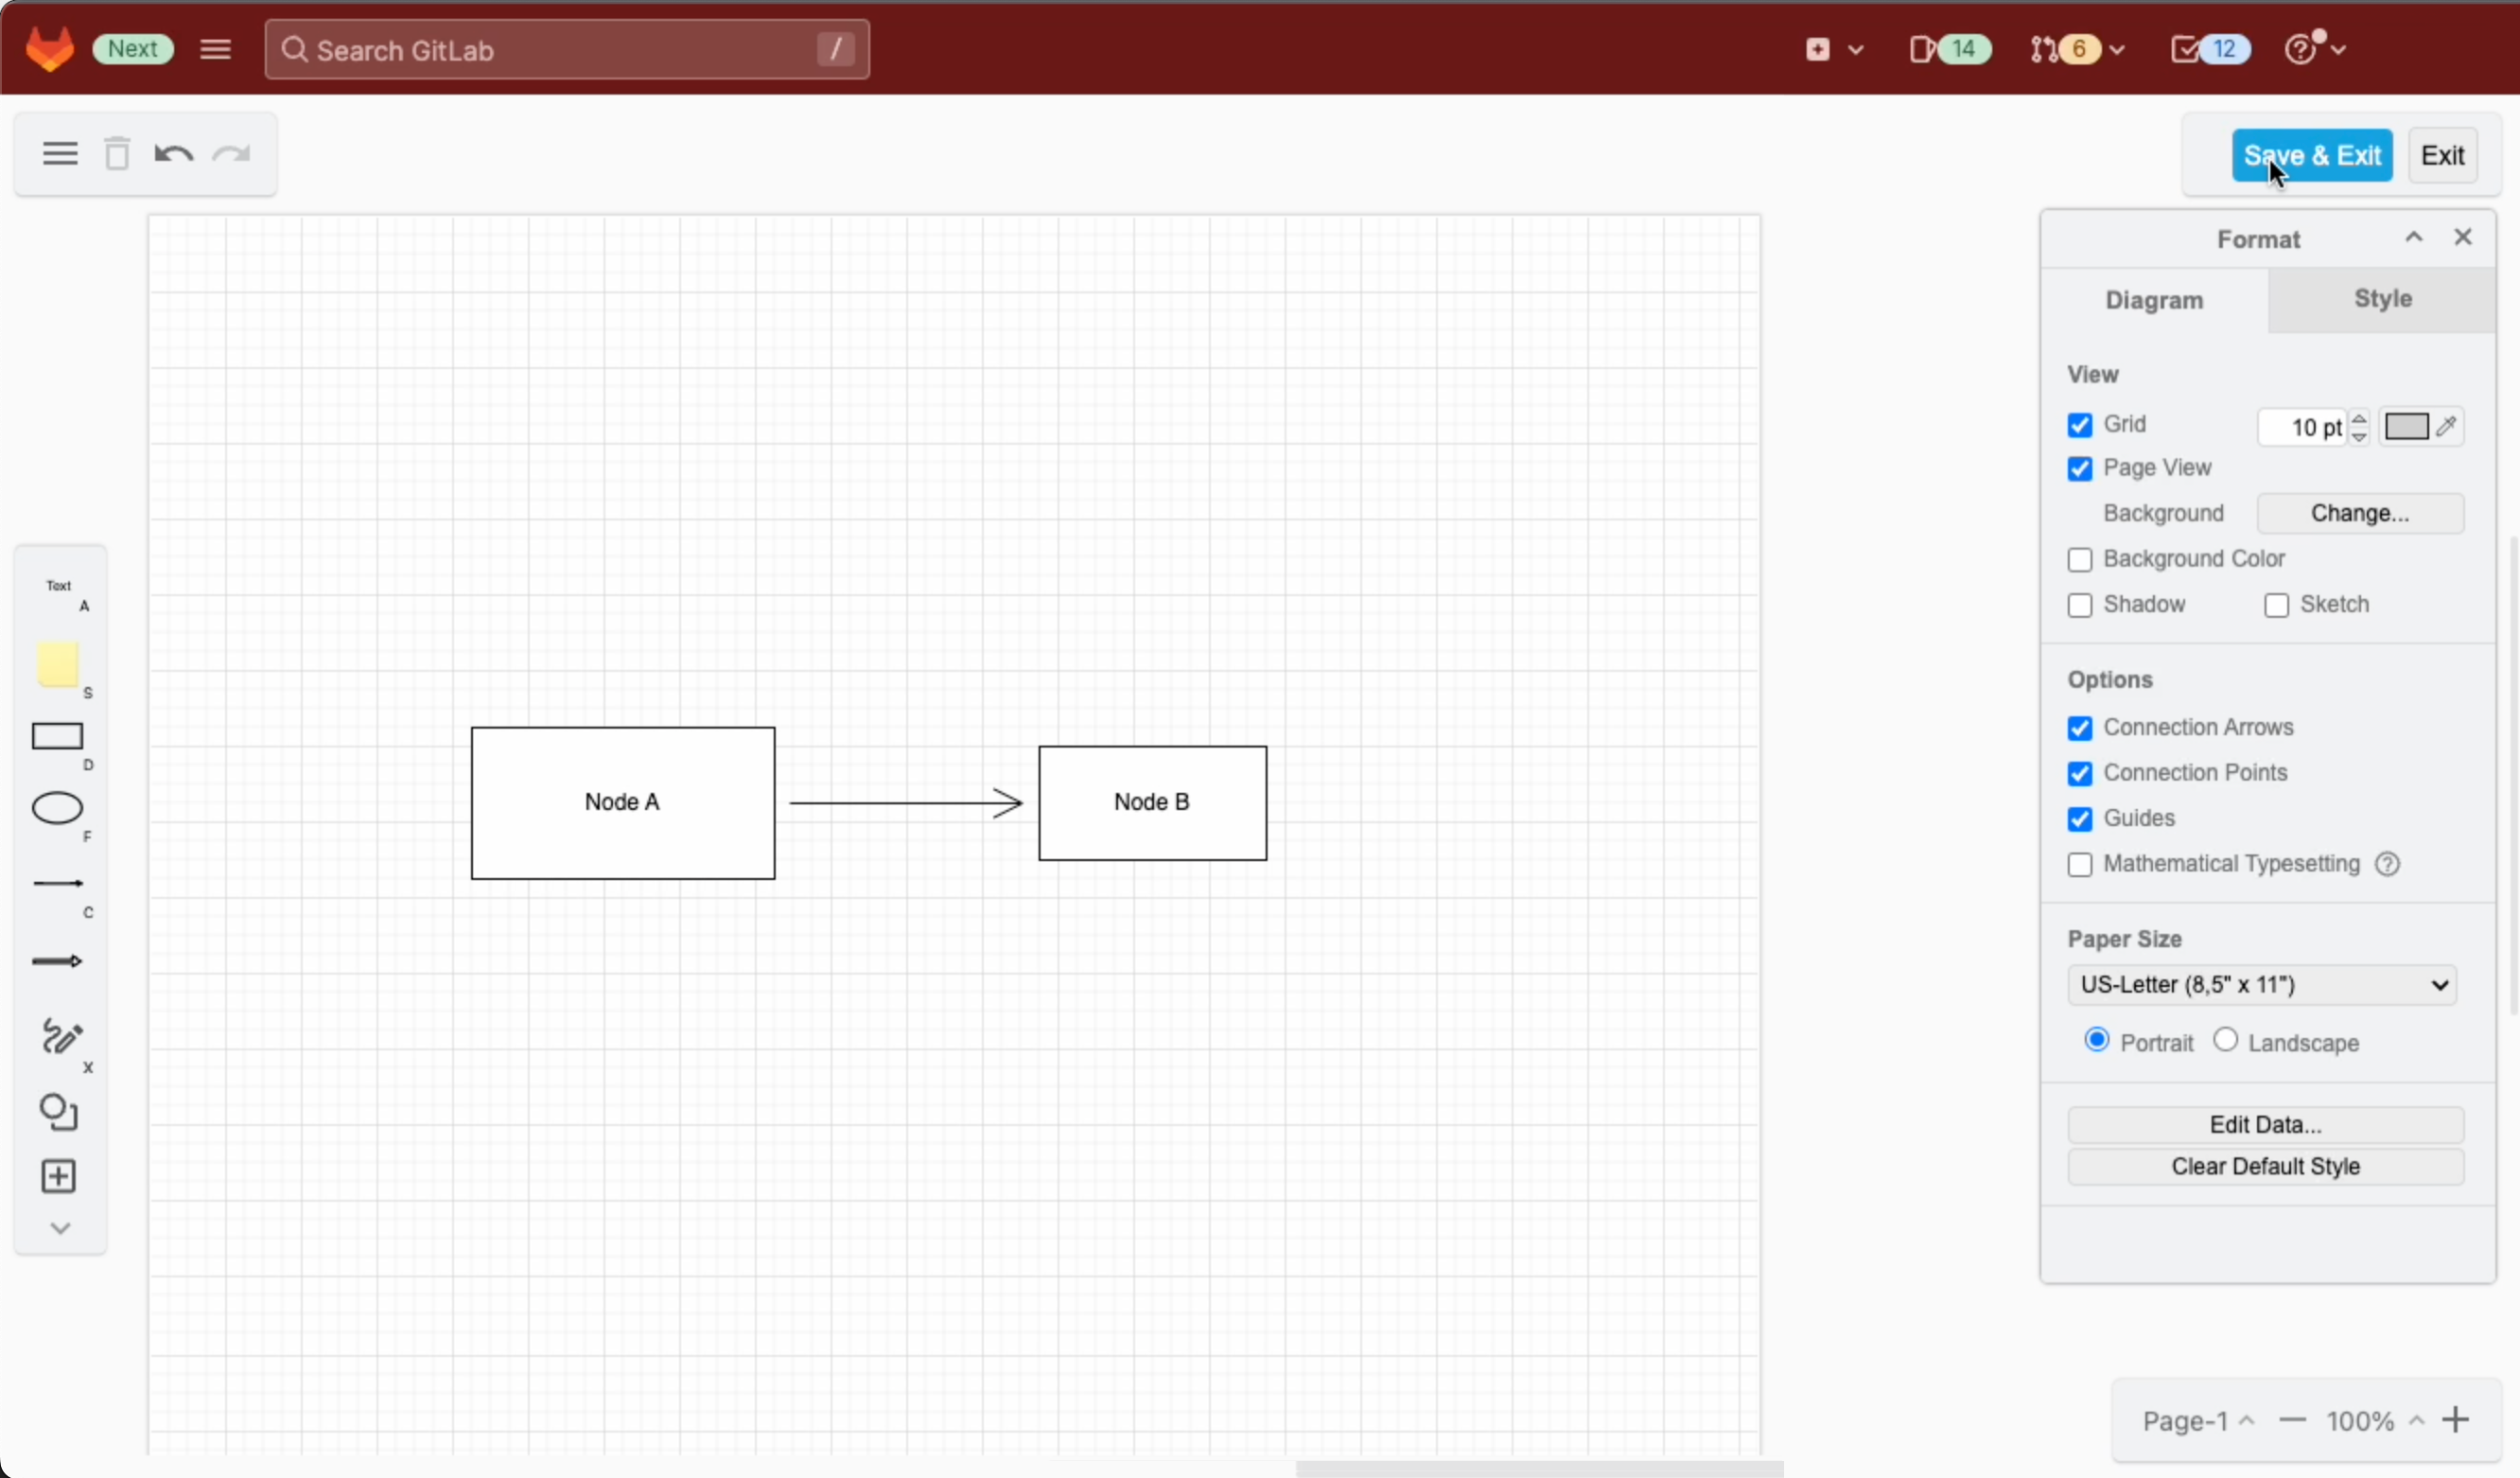 Create your diagram in the Sketch whiteboard-like editor, and save it to return to the GitLab Markdown editor